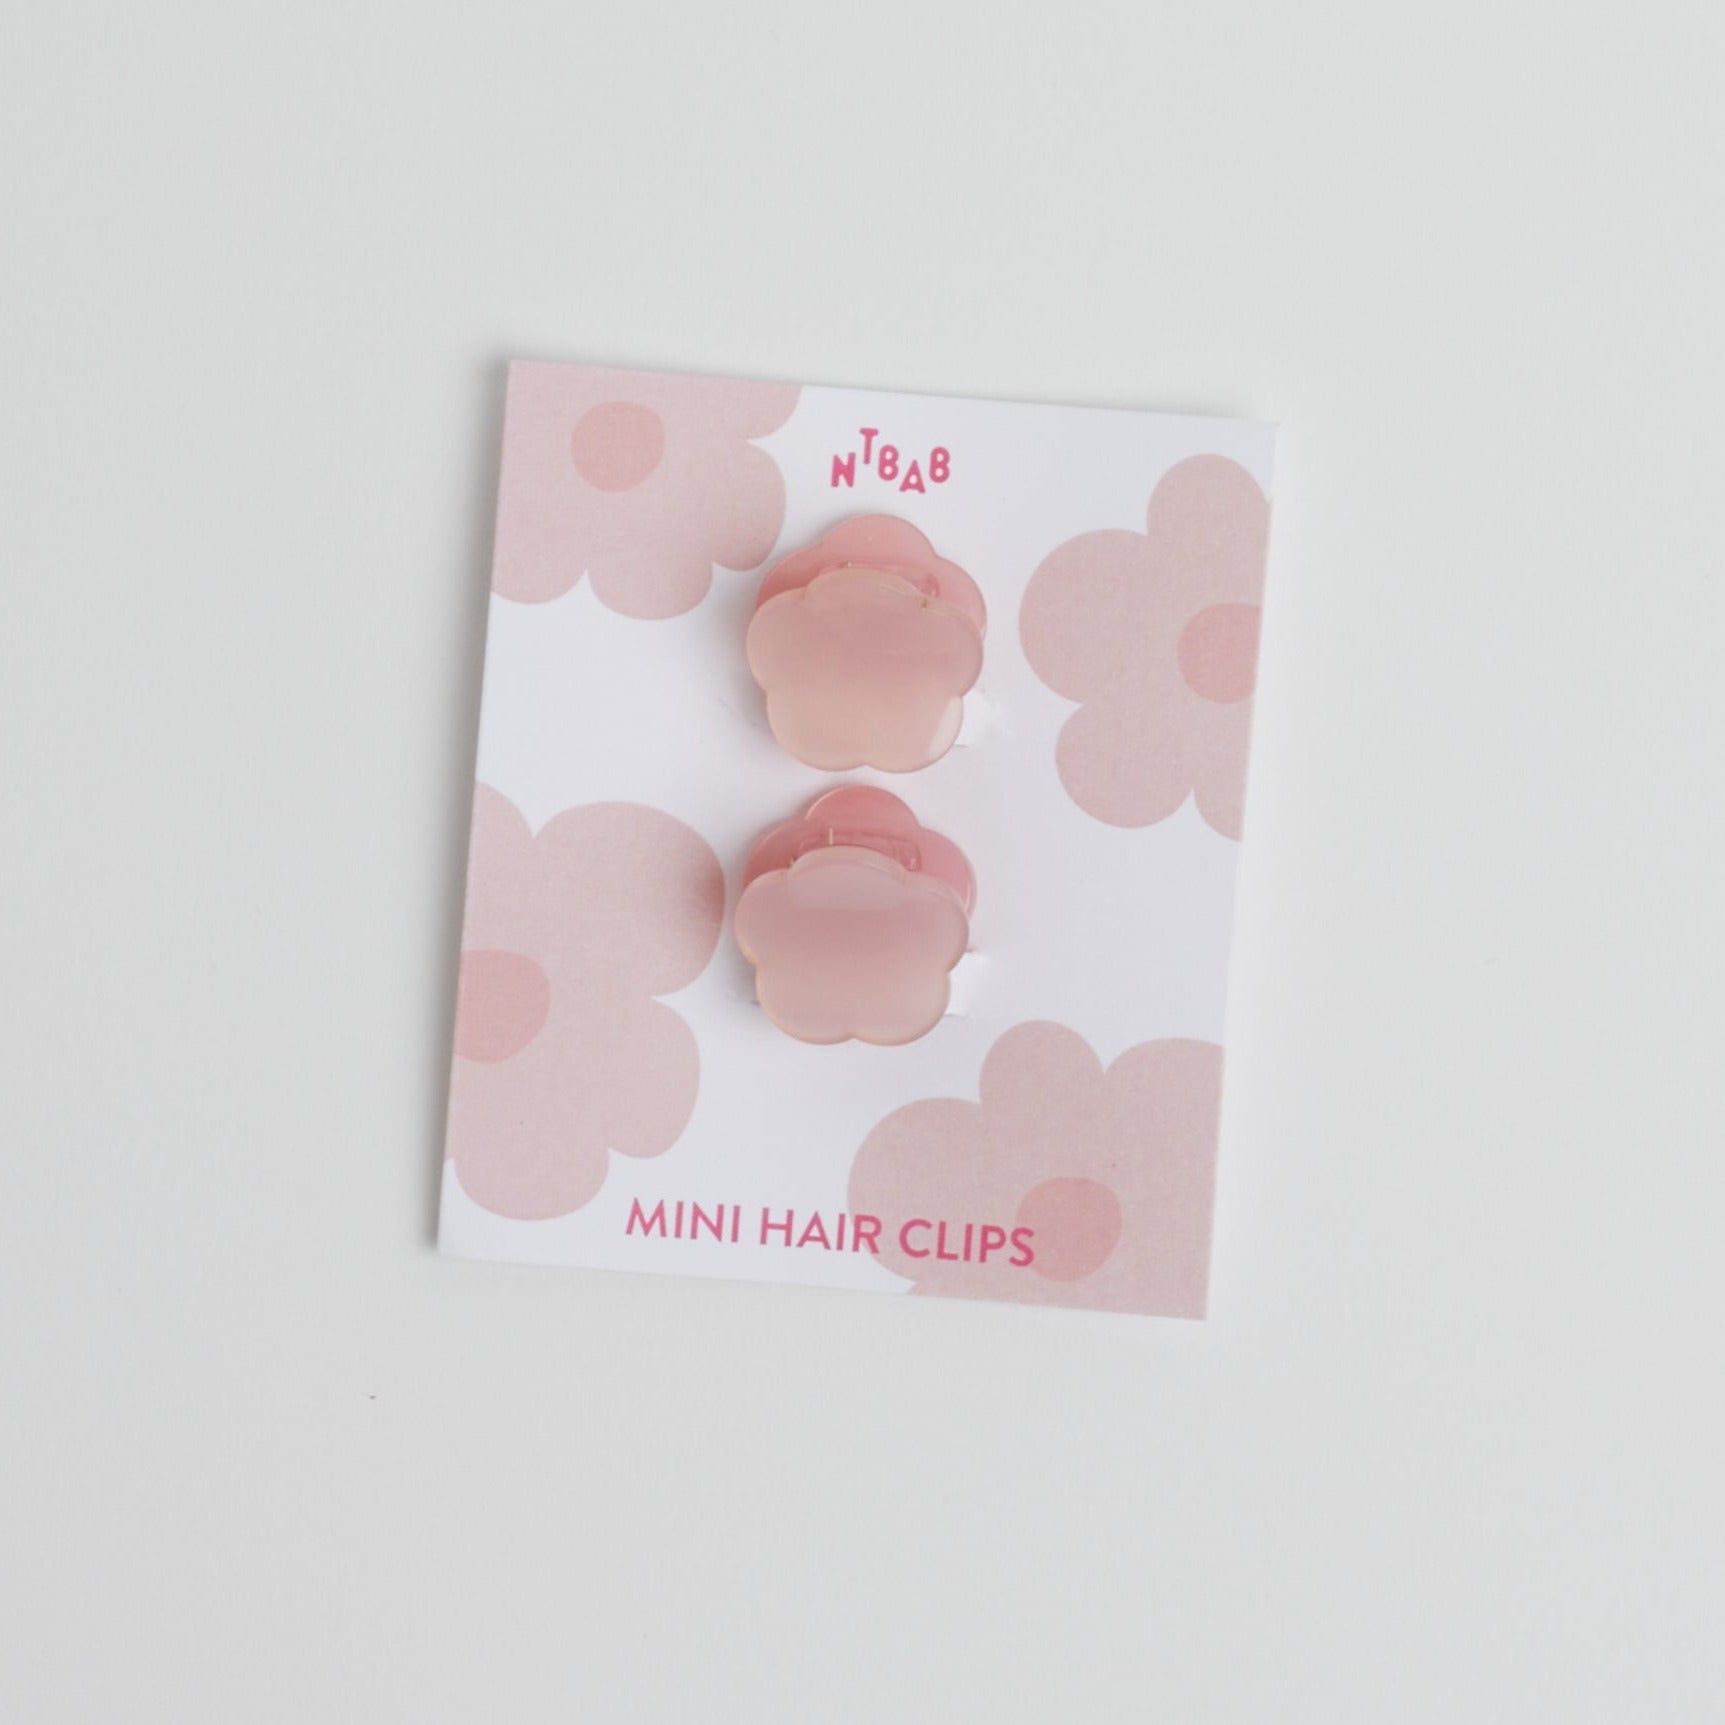 Two Pink Mini Flower Hair Clips in packaging on white background